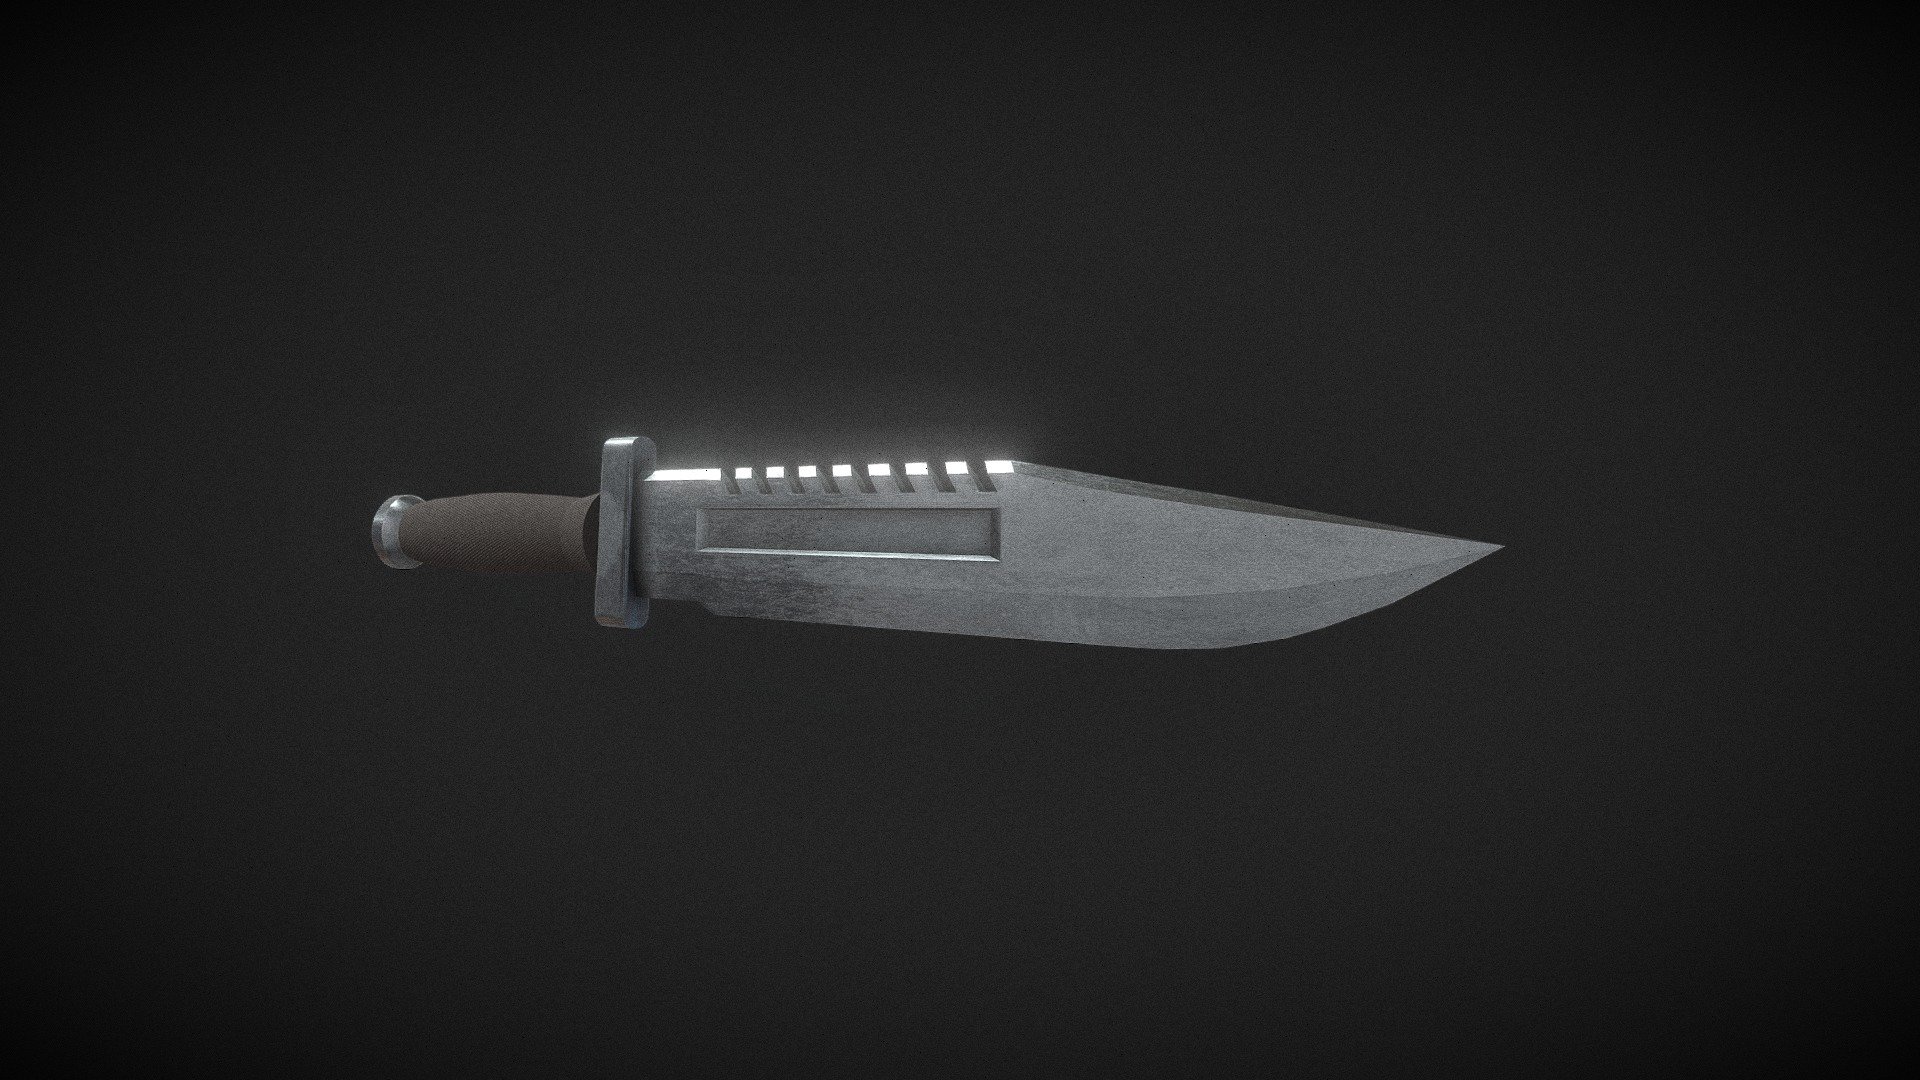 Presenting our Weathered Survival Knife 3D model, a true embodiment of endurance and ruggedness. This remarkable piece bears the scars of countless adventures, proudly displaying its history through the rough scratches and wear marks etched into its well-seasoned surface. If you seek a symbol of survival and tenacity, look no further than this vintage masterpiece.

Key Features:

Battle-Hardened Appearance: The Weathered Survival Knife 3D model boasts an authentic, weathered appearance with prominent scratches and signs of wear, showcasing its journey through the harshest of conditions.

Proven Durability: Despite its aged appearance, this knife is a testament to its original craftsmanship, demonstrating that it has stood the test of time and remained functional throughout its rough adventures 3d model